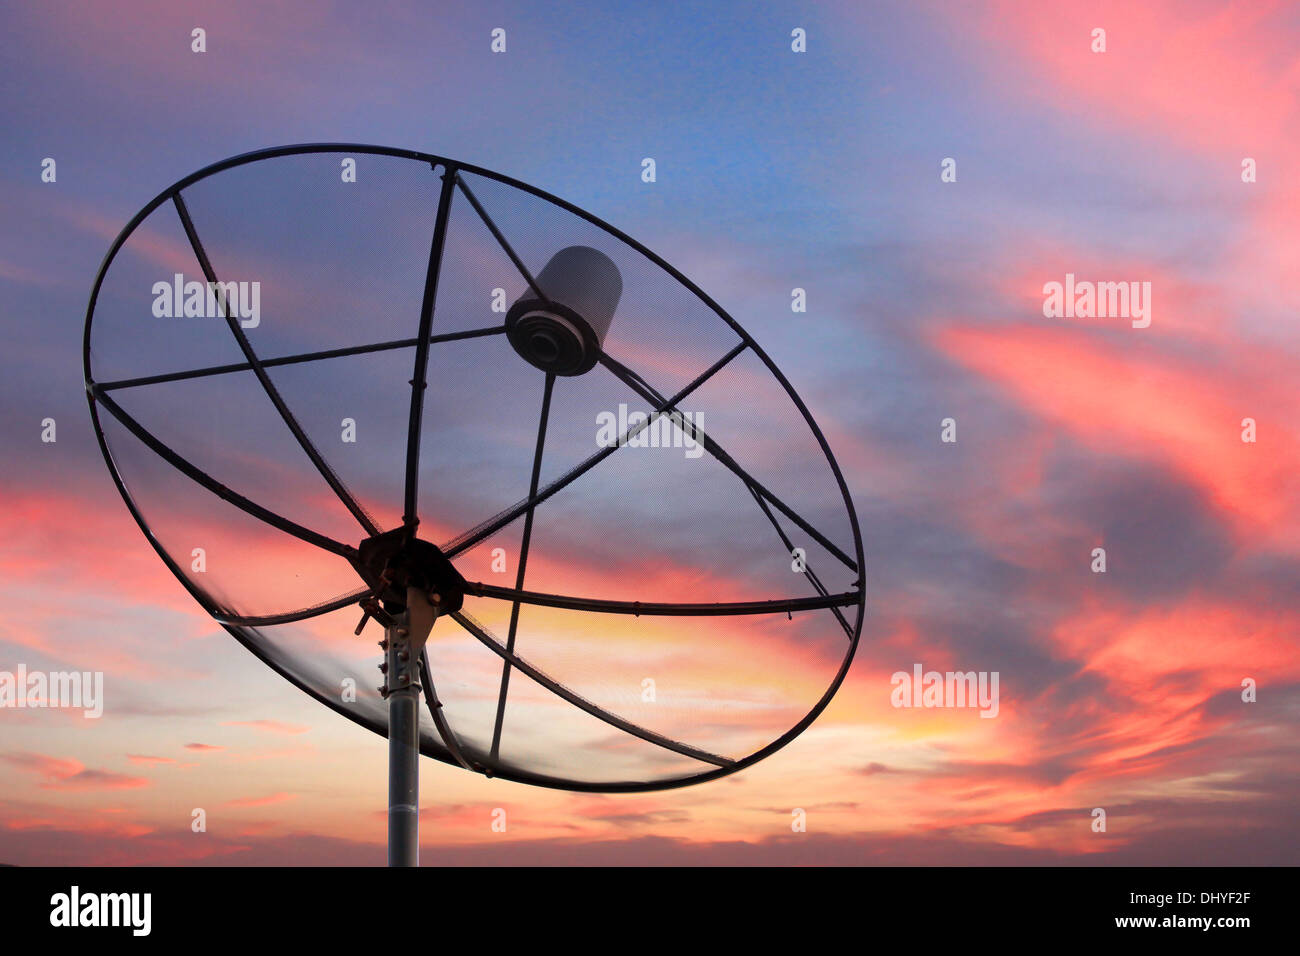 The Picture Satellite dish on Evening light. Stock Photo